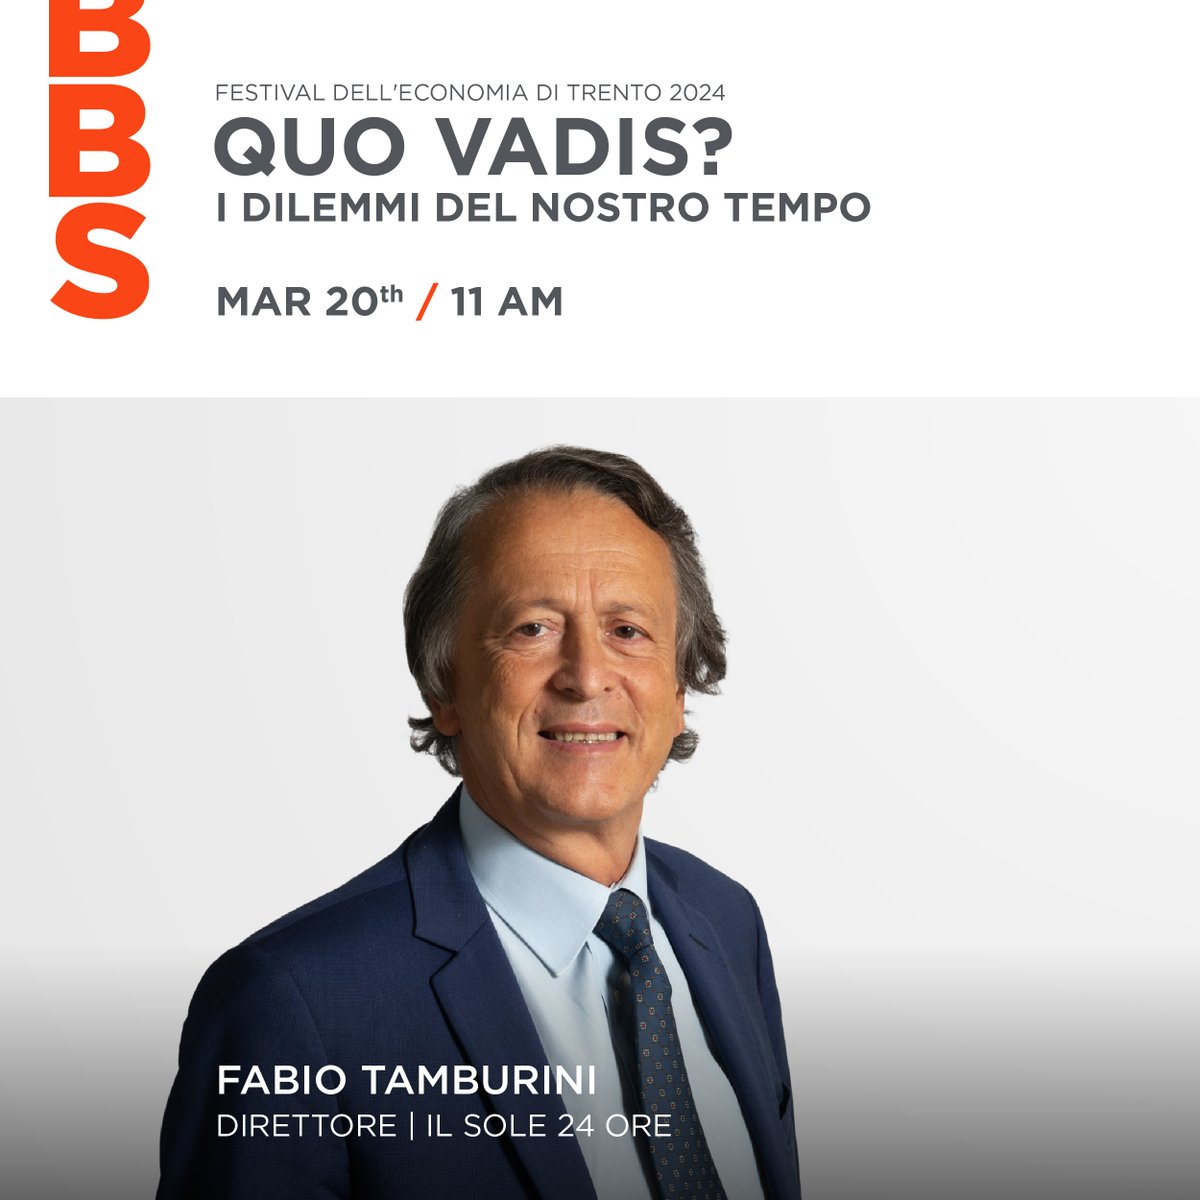 On Wednesday, March 20th, Fabio Tamburini, Director of Il Sole 24 Ore, Radiocor and Radio 24, will present a preview of the new edition of the Trento Economy Festival. Entry reserved for the BBS Community. Find out more 👉 tinyurl.com/4rxfcs2z